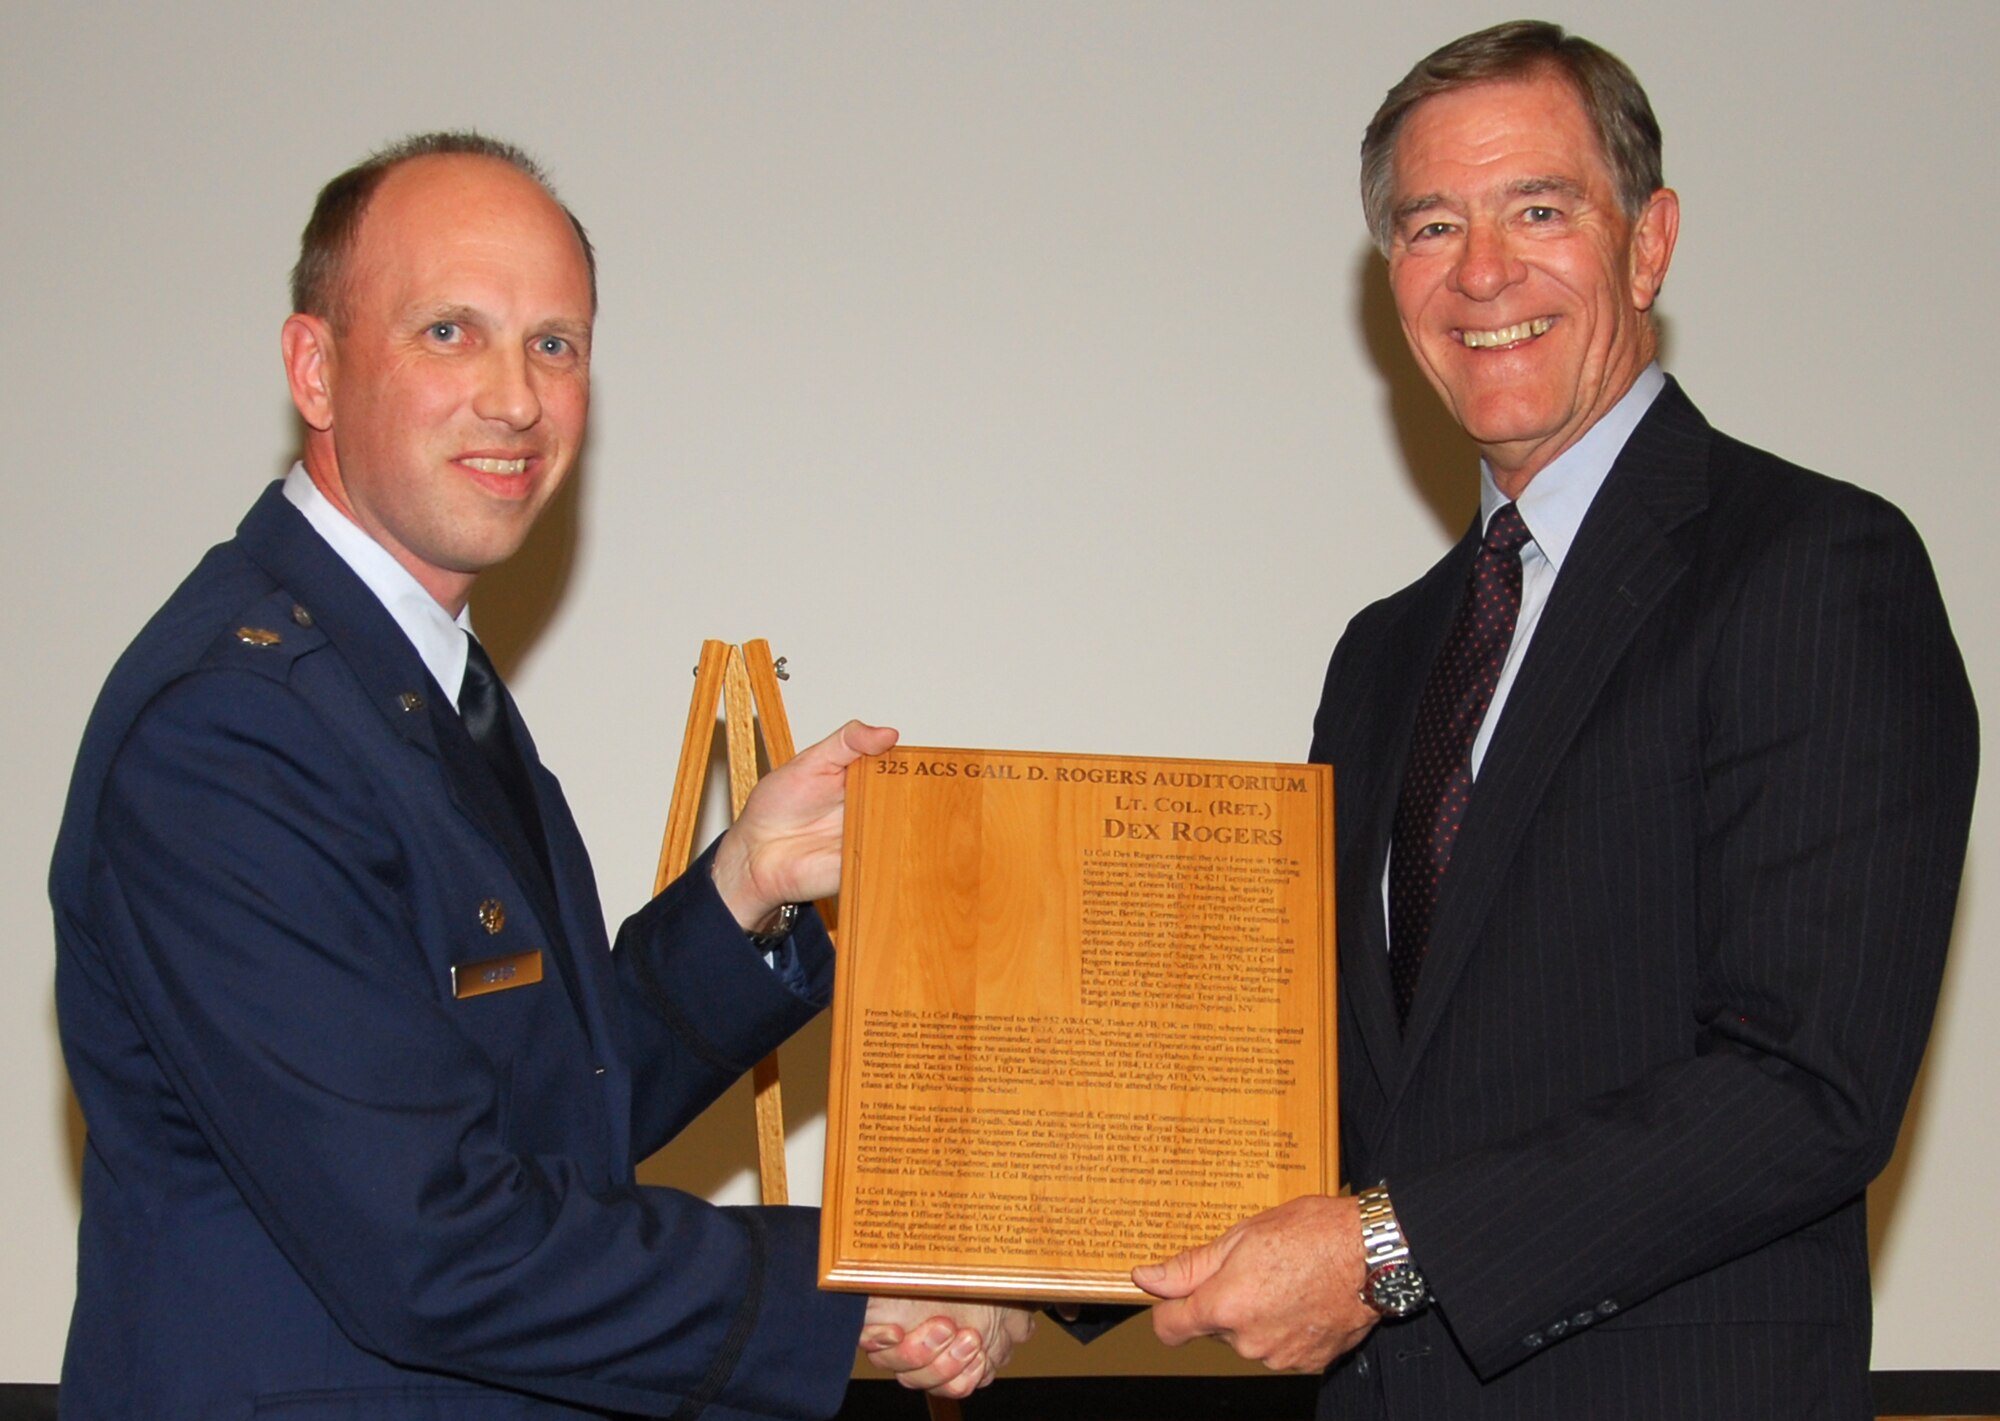 Lt. Col. Charles Mayer, 325th Air Control Squadron commander, honors (ret.) Lt. Col. Gail Rogers with an auditorium dedication Tuesday.  Lt. Col. Rogers served as the 325th Weapons Controller Training Squadron commander at Tyndall in 1990.  (U.S. Air Force photo by Susan Trahan)